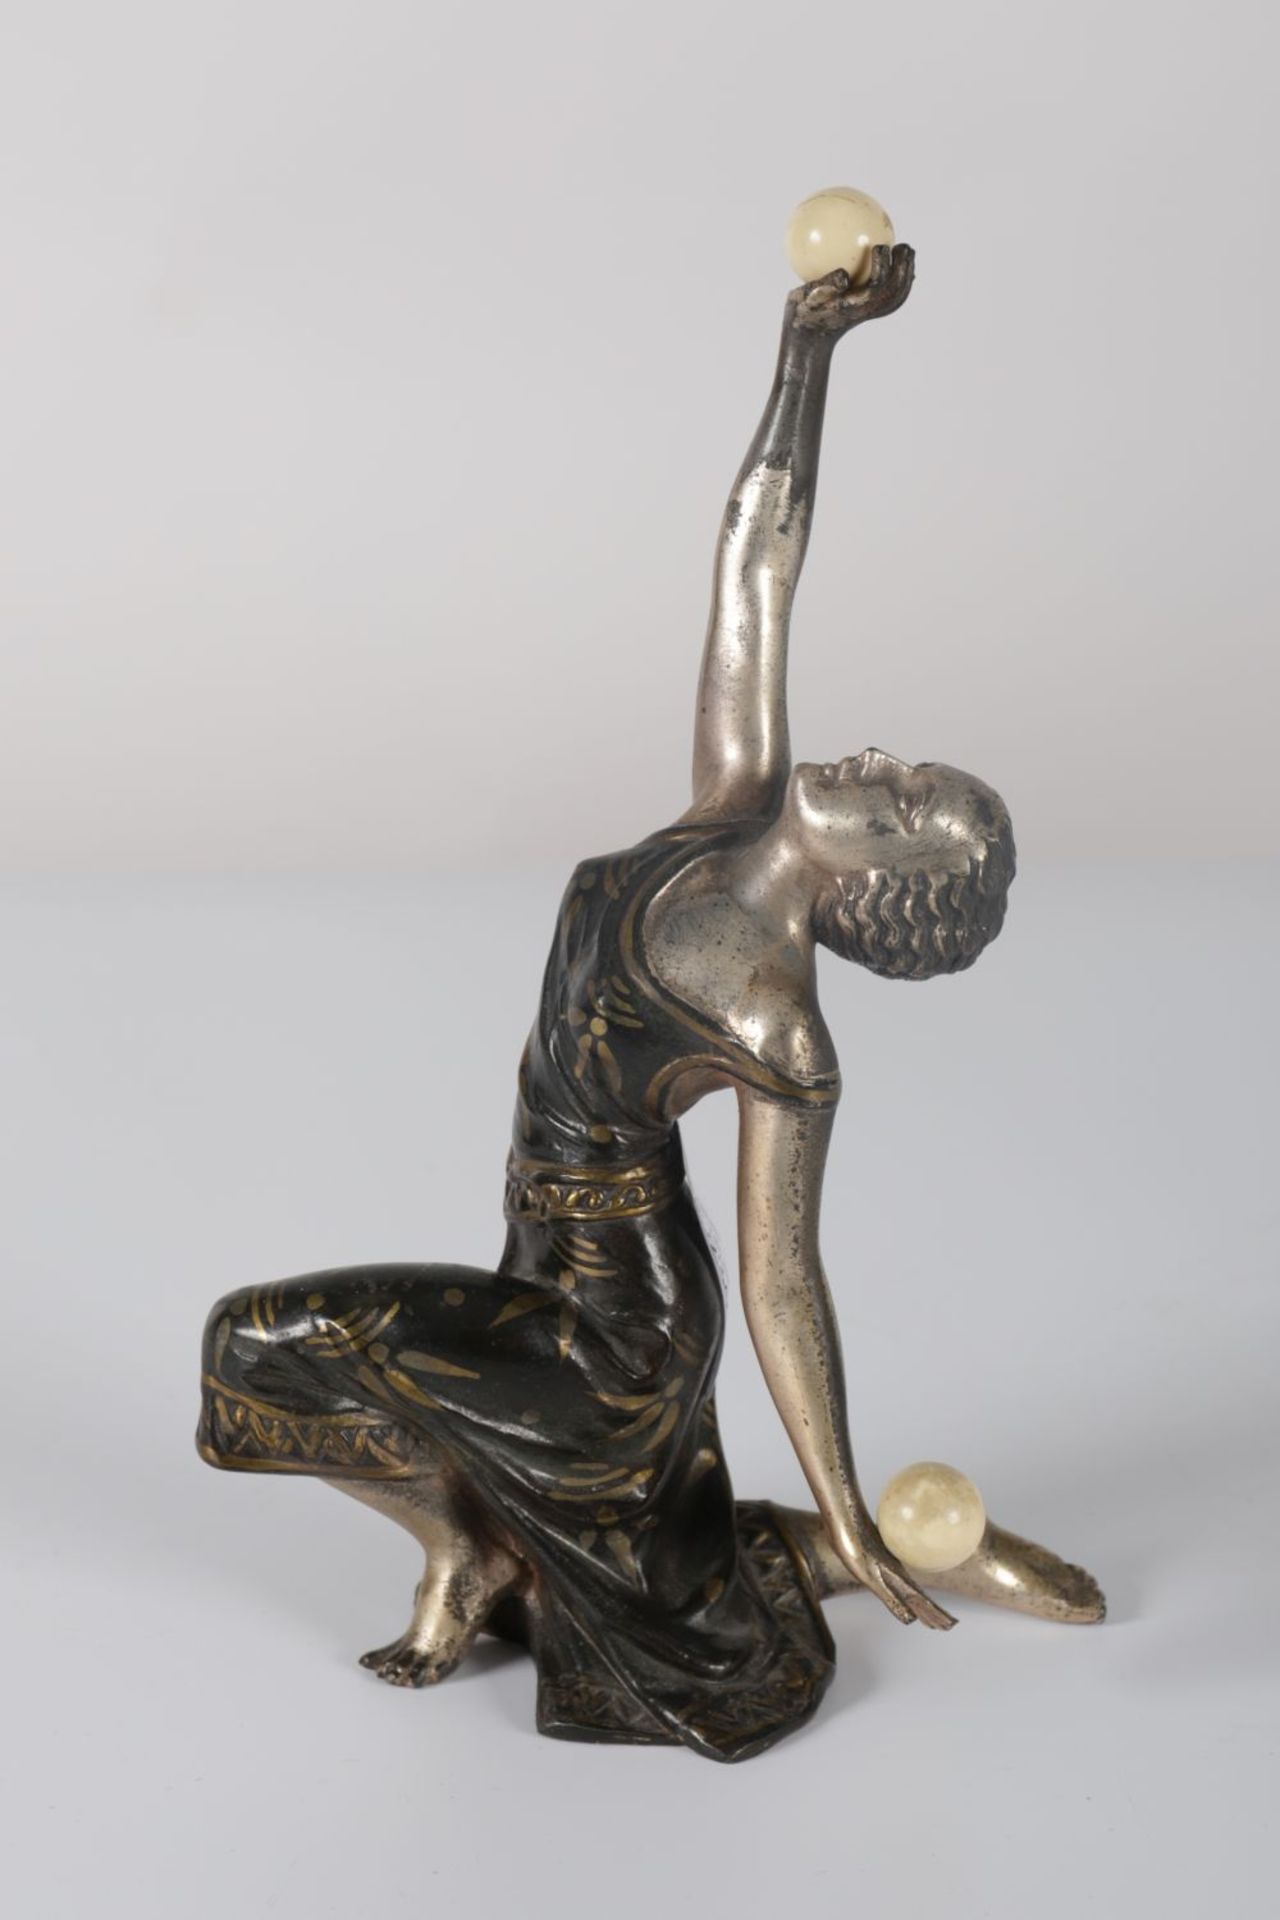 ART DECO SILVERED & BRONZED FIGURE - Image 3 of 3